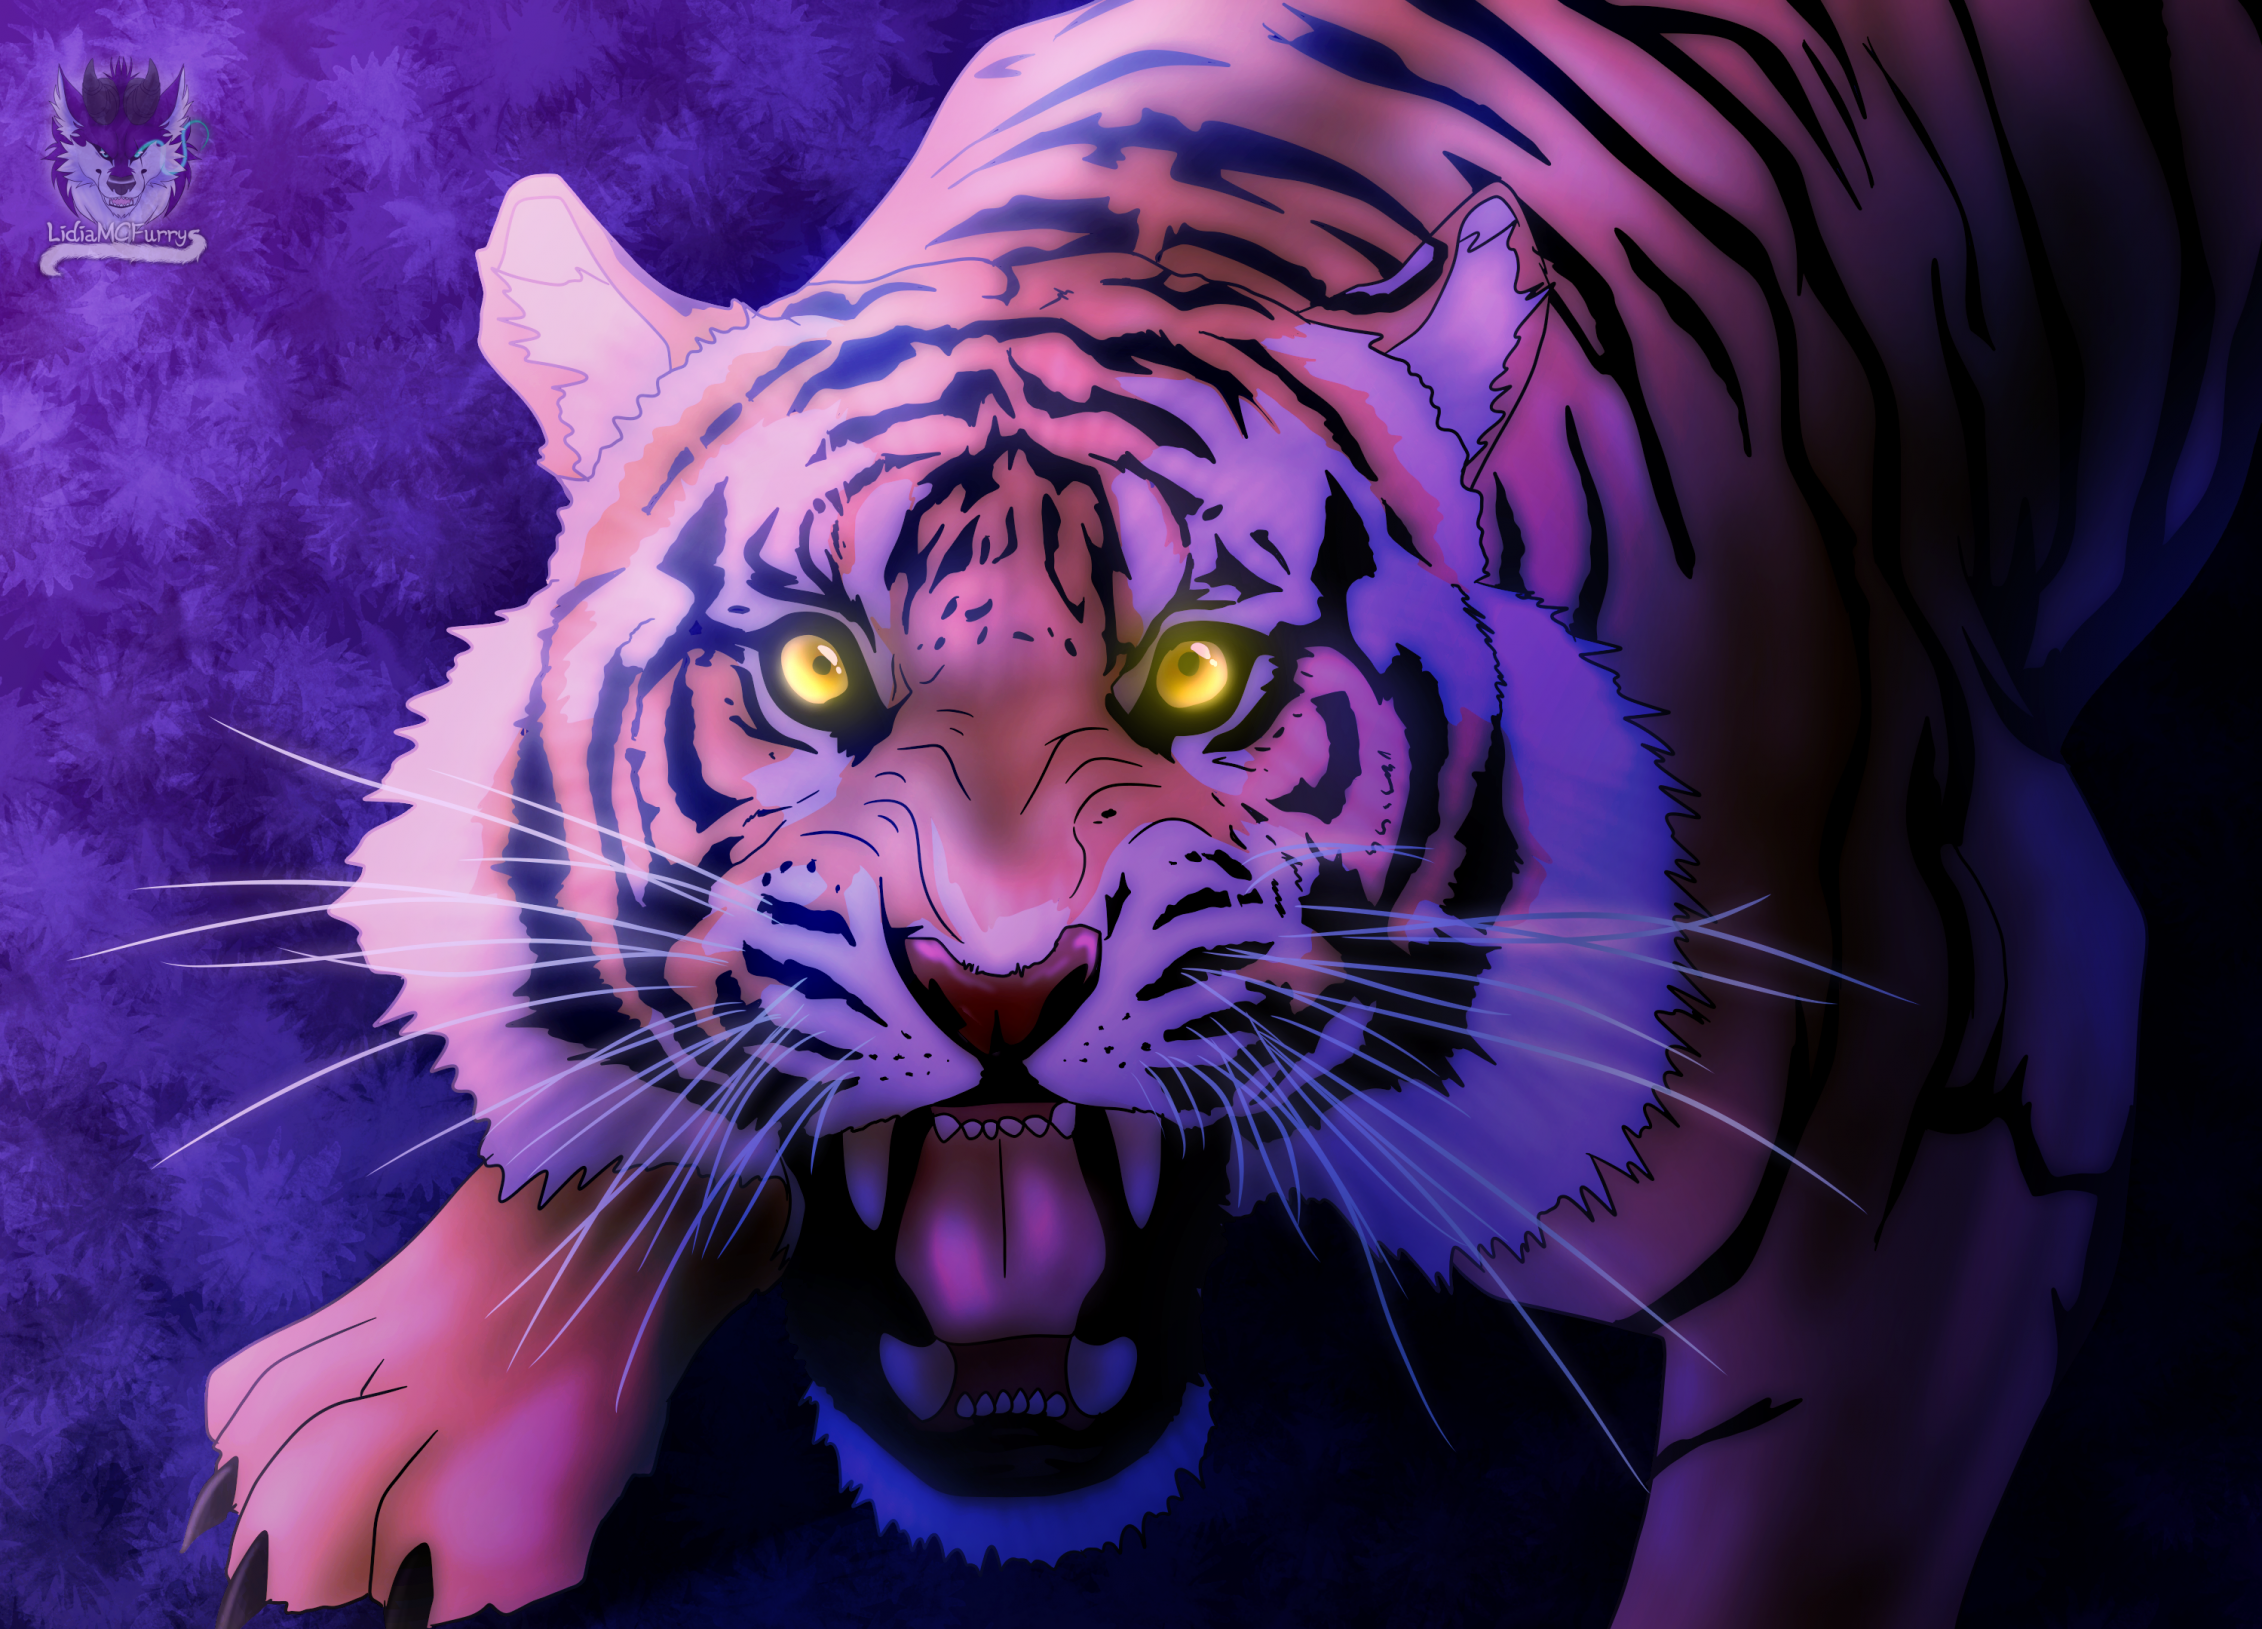 Girls and Tiger - Anime Love and Romance Wallpapers and Images - Desktop  Nexus Groups